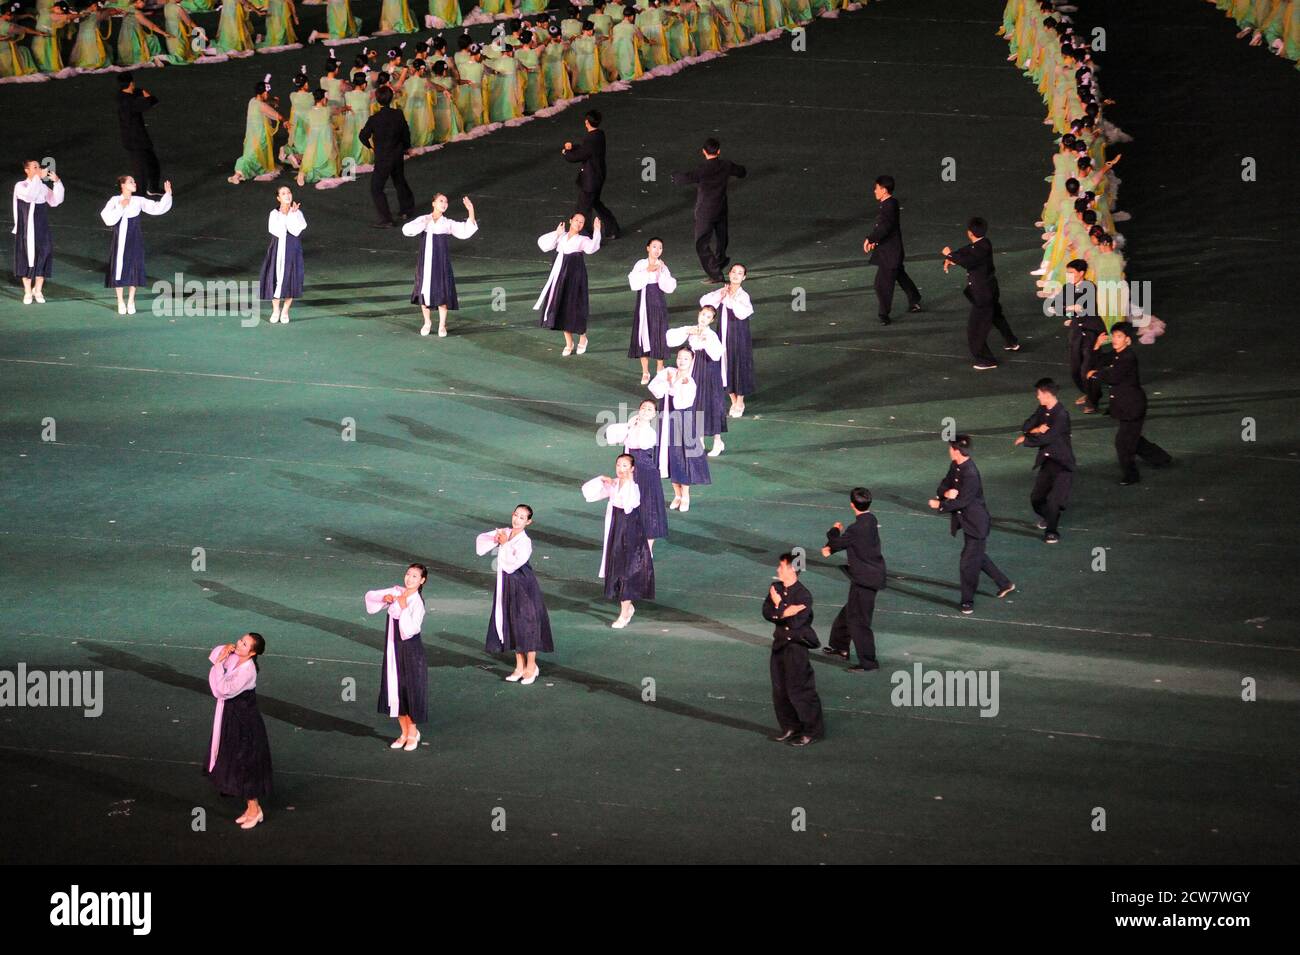 08.08.2012, Pyongyang, North Korea - Mass choreography and Artistic Performance with dancers and acrobats at May Day Stadium during Arirang Festival. Stock Photo